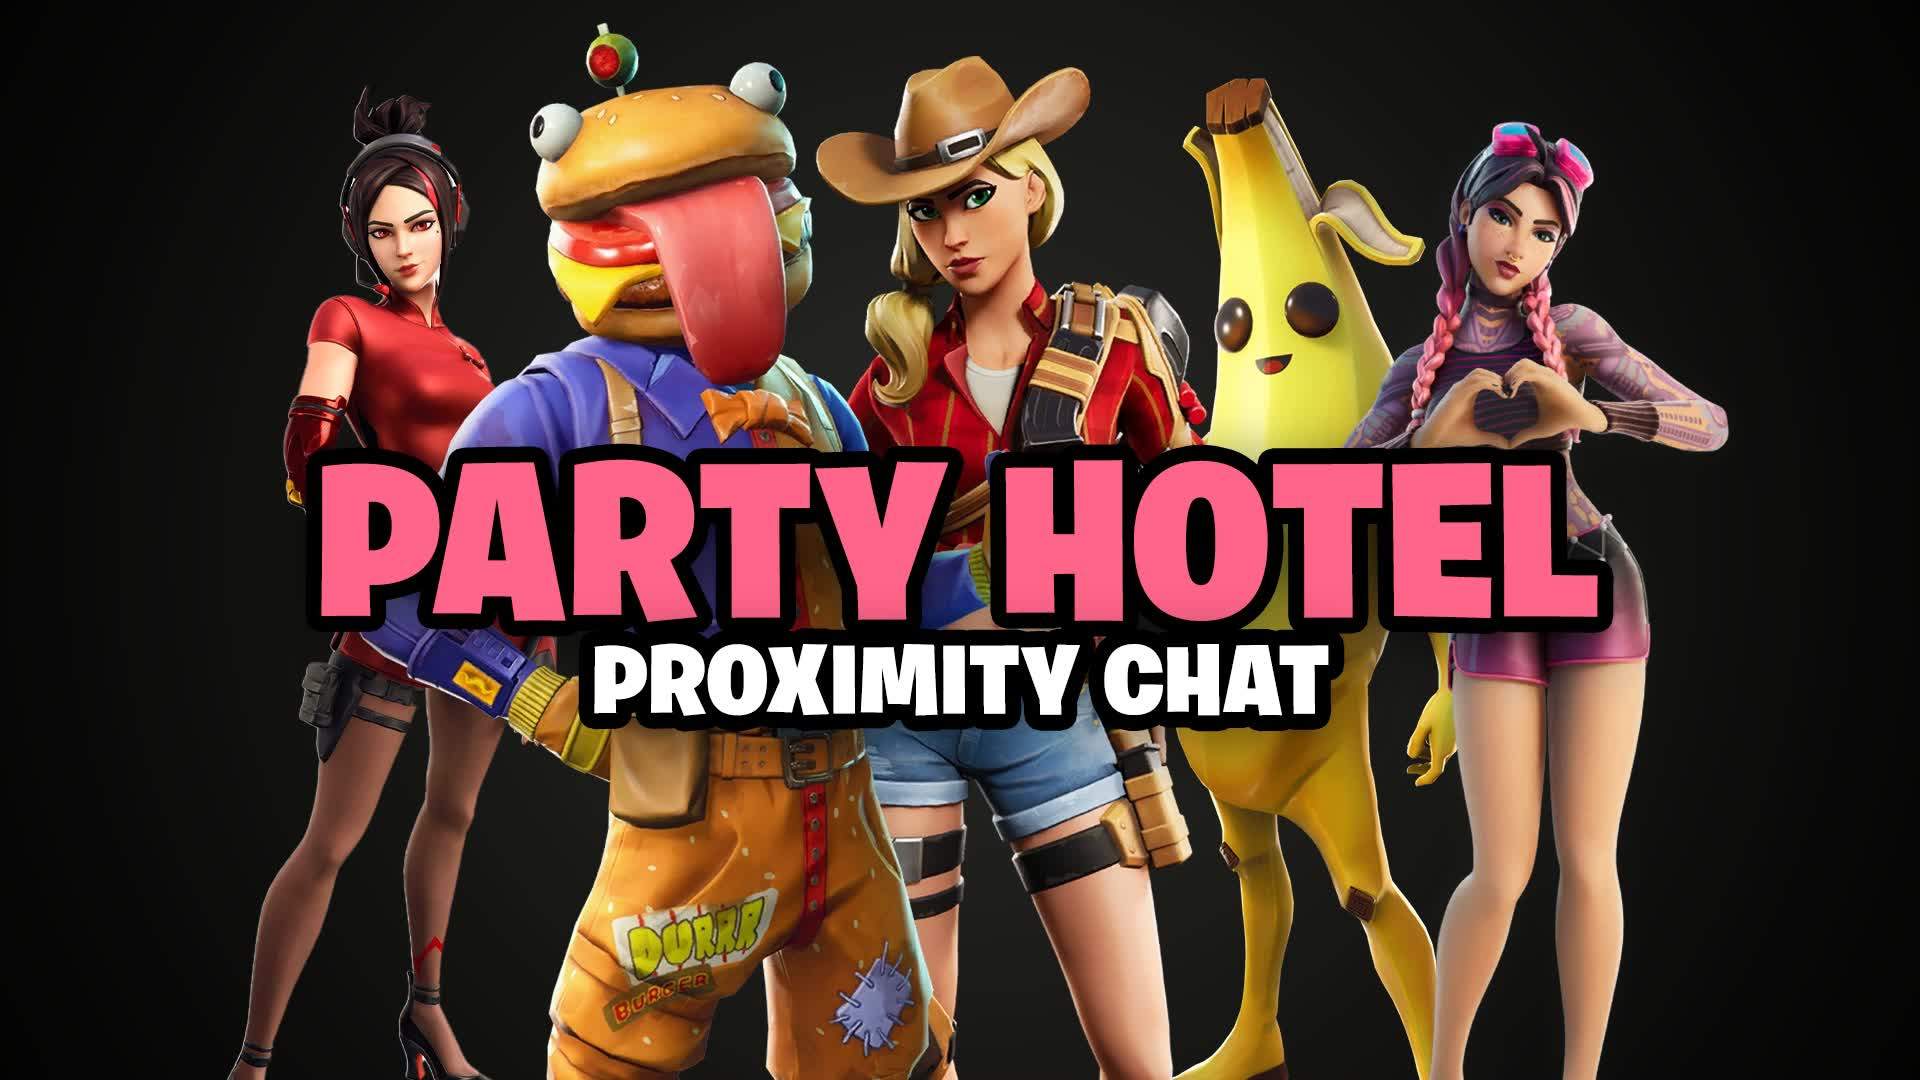 PARTY HOTEL - PROXIMITY CHAT